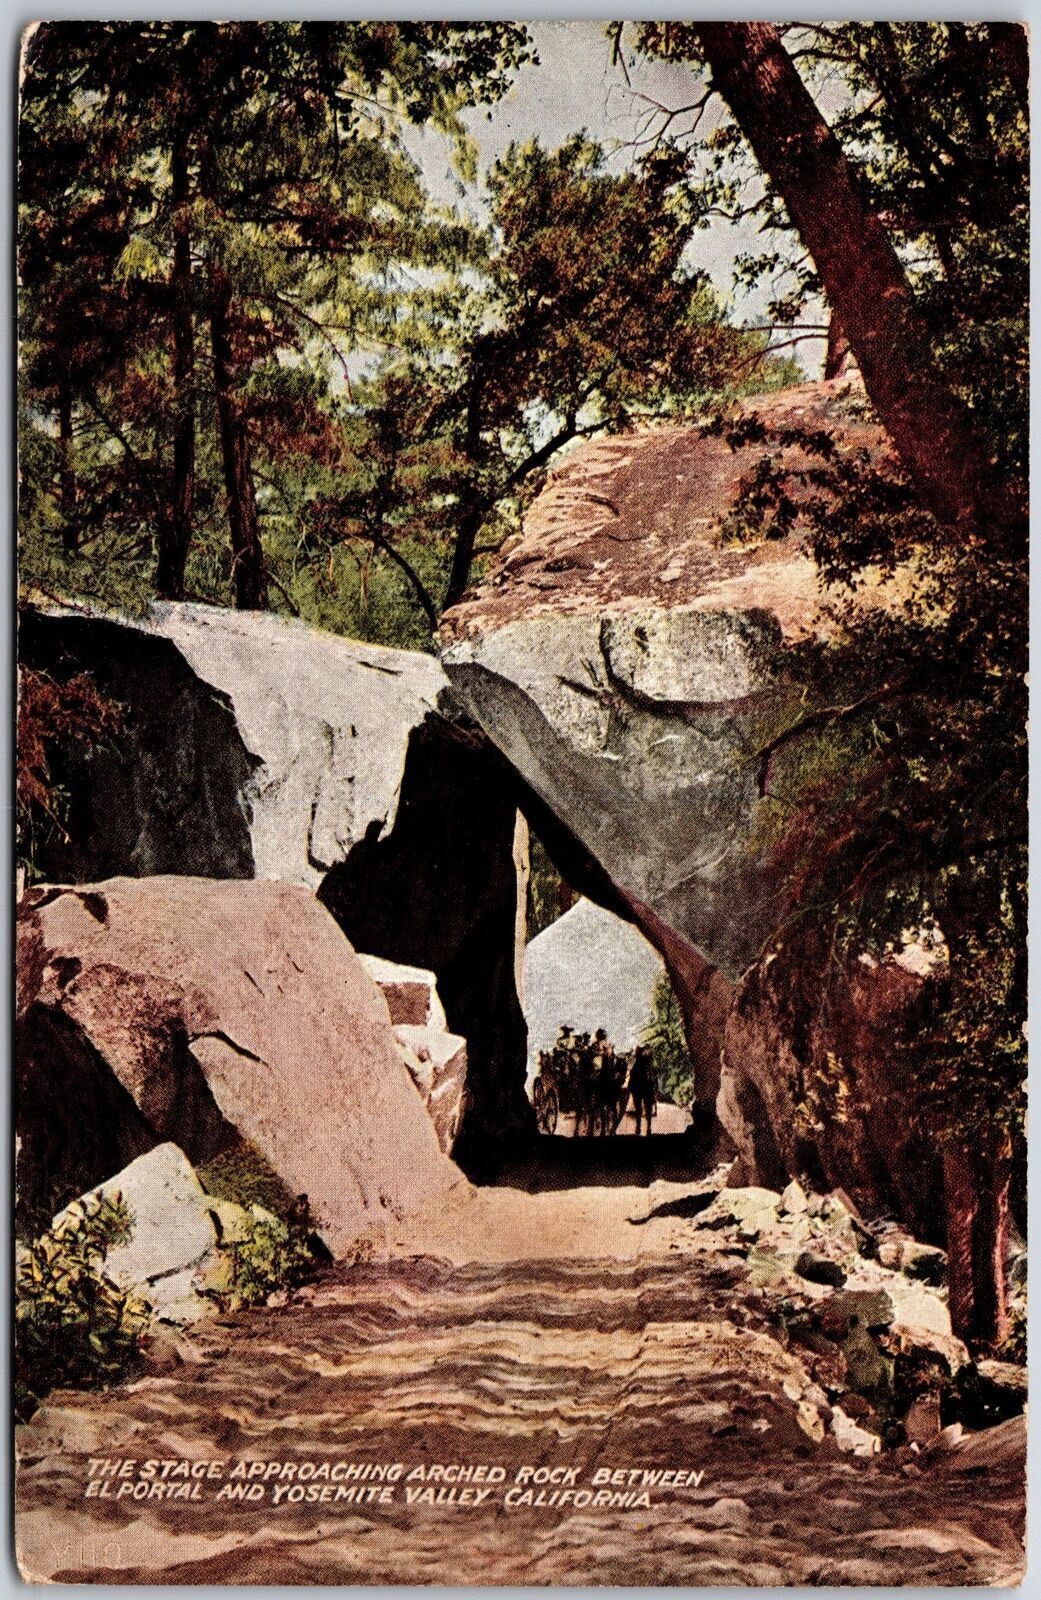 Stage Approaching Arched Rock El Portal & Yosemite Valley California Postcard